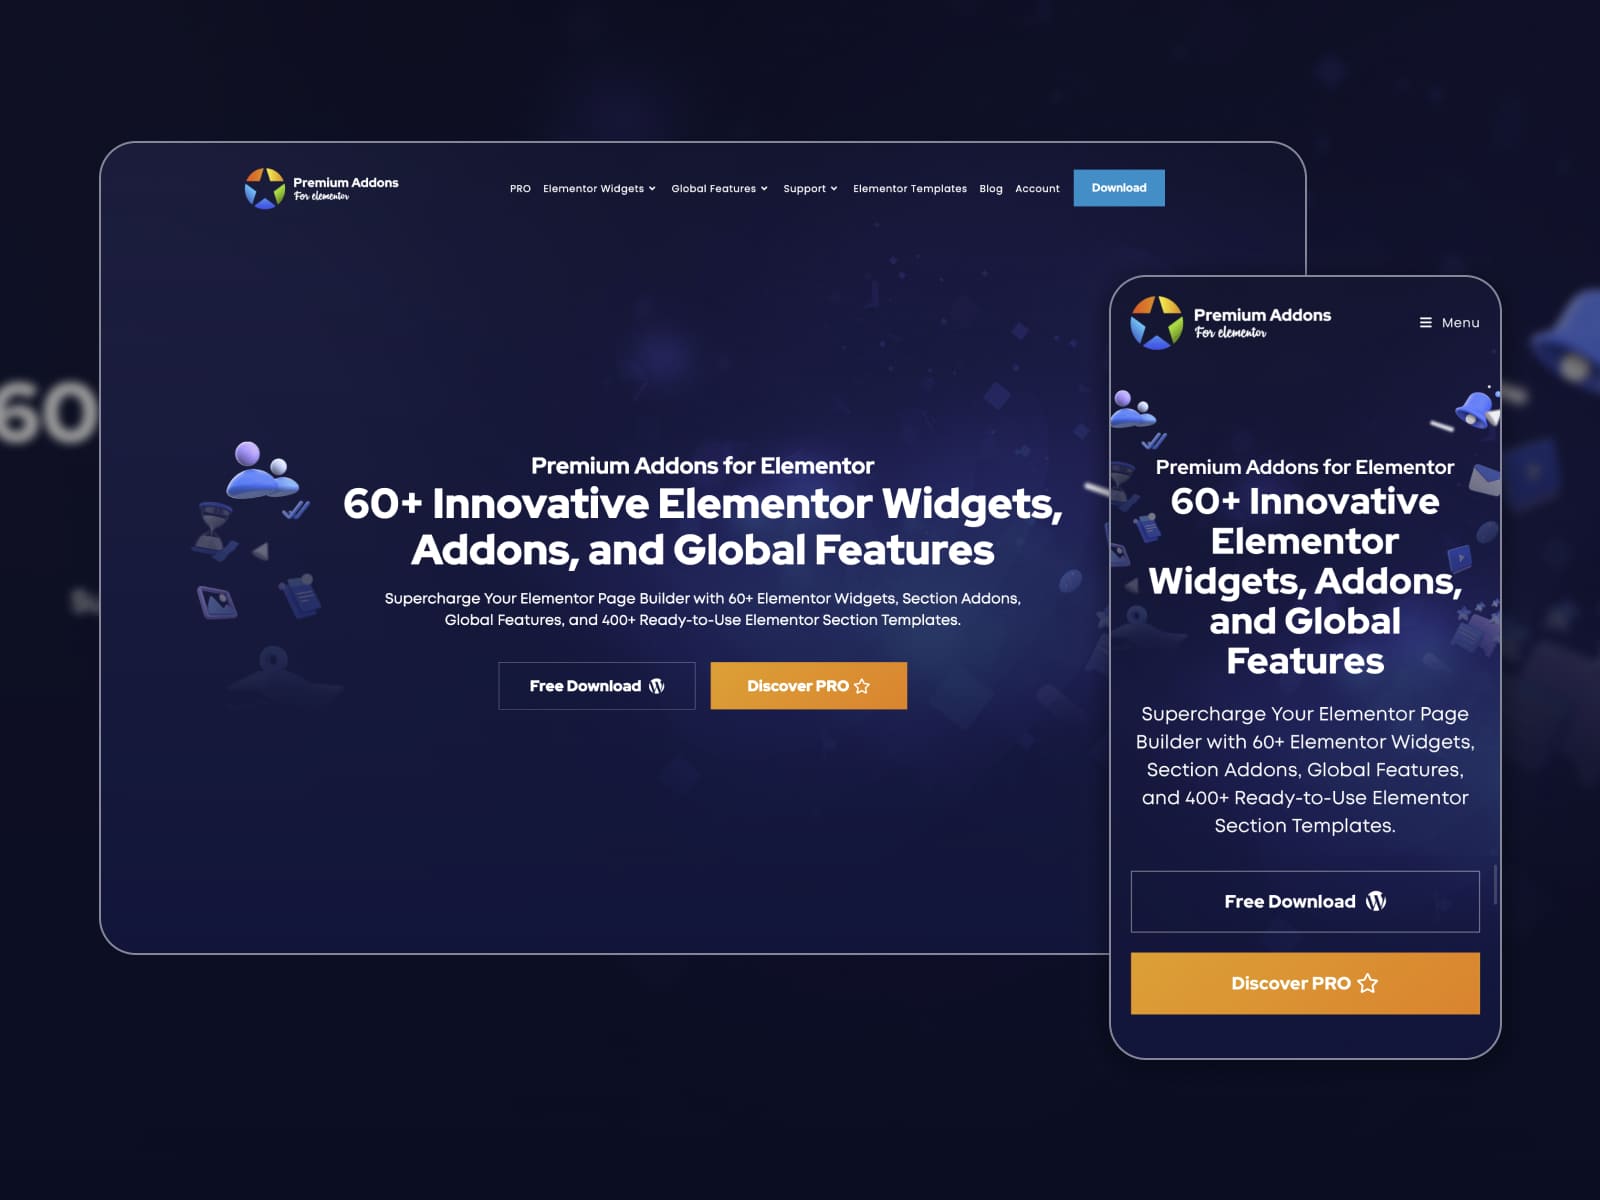 The landing page of the Premium Addons for Elementor.